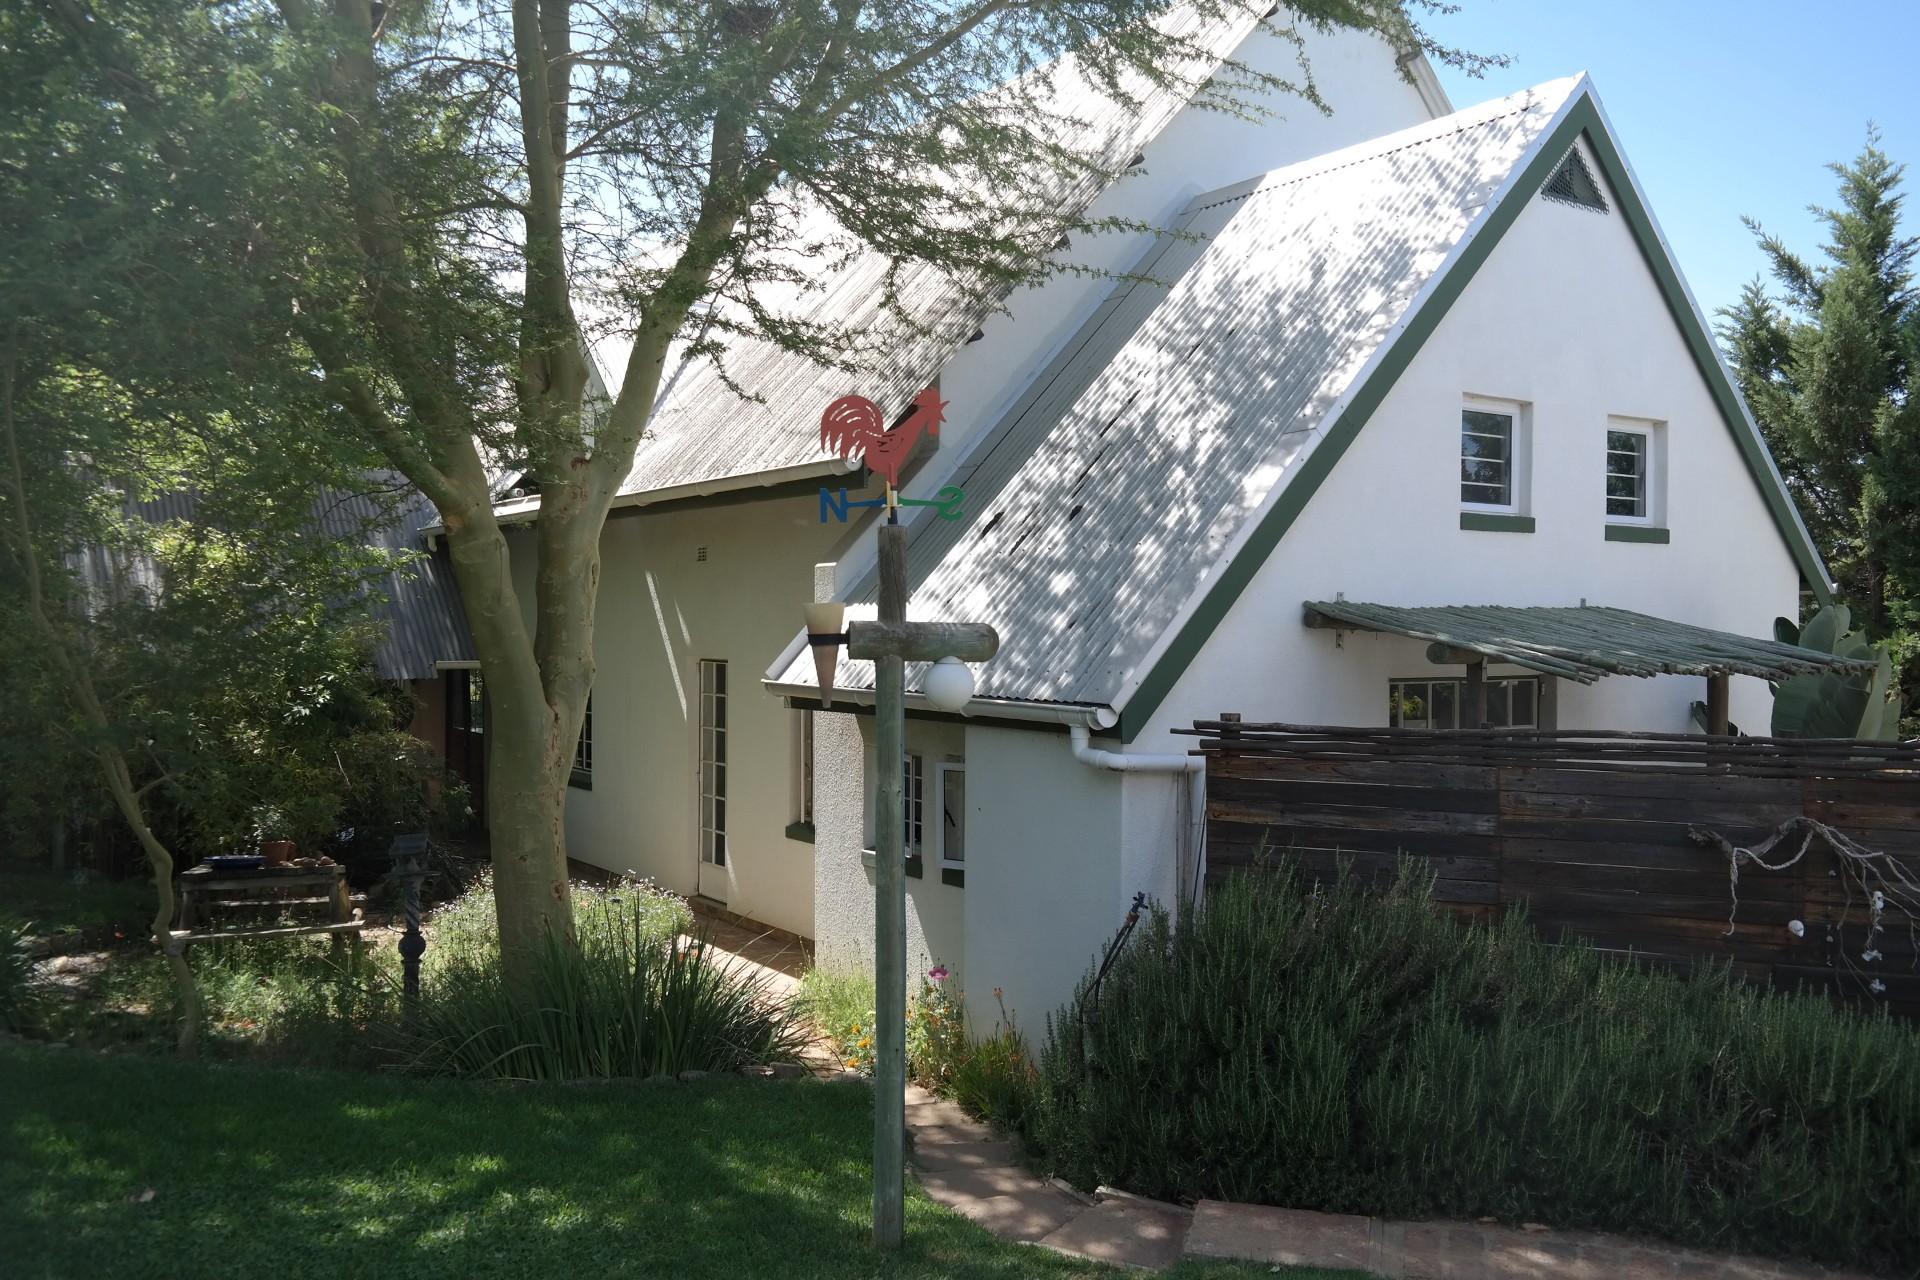 Front View of property in Malmesbury